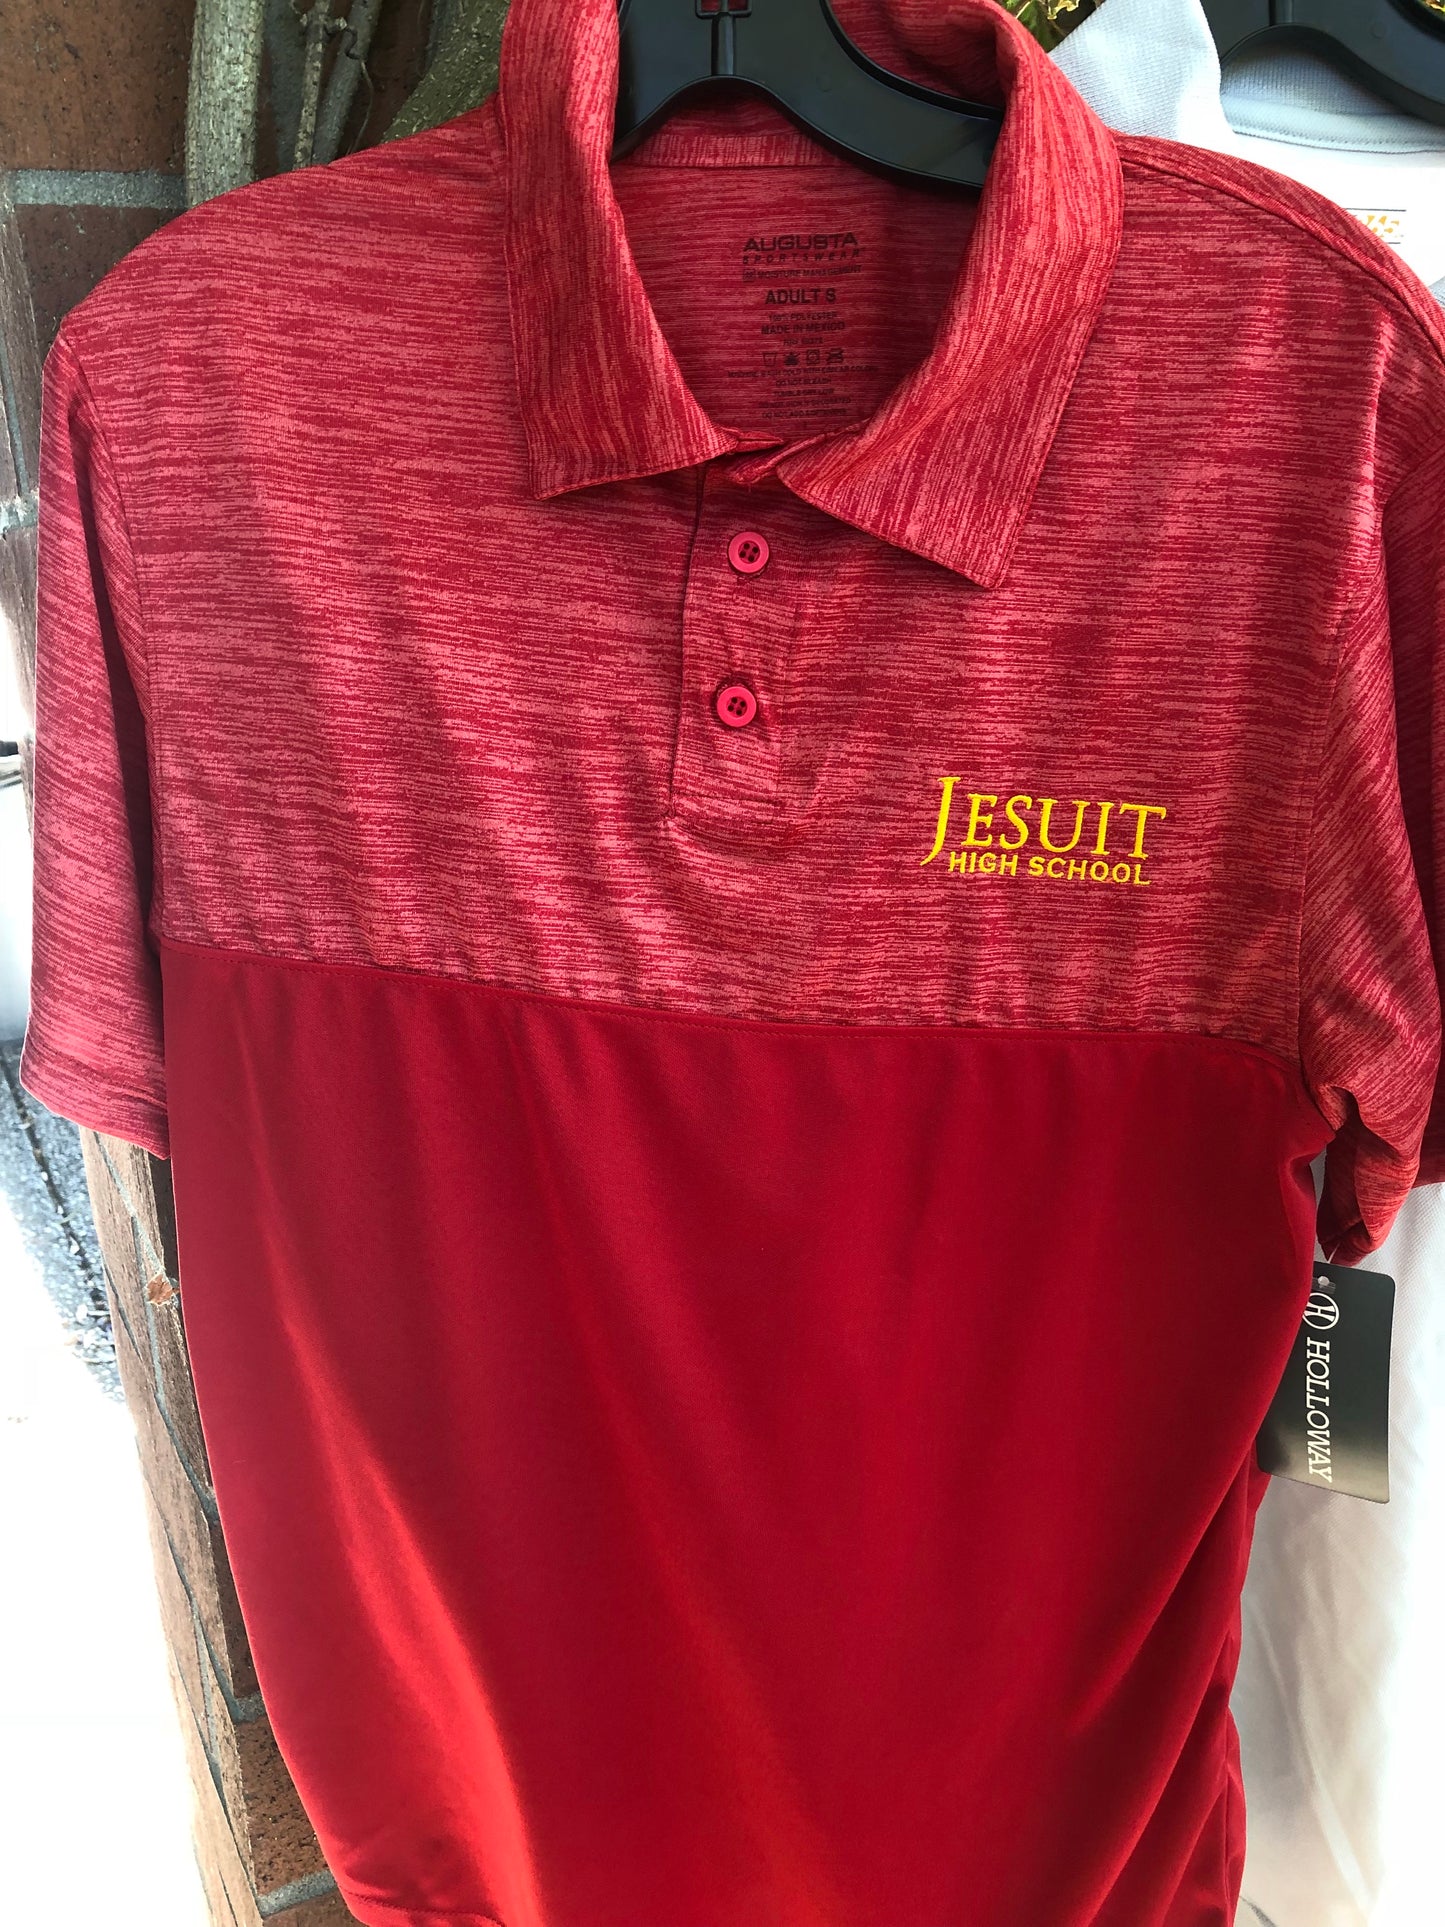 Dry Fit Jesuit Shadow Heather Red Polo